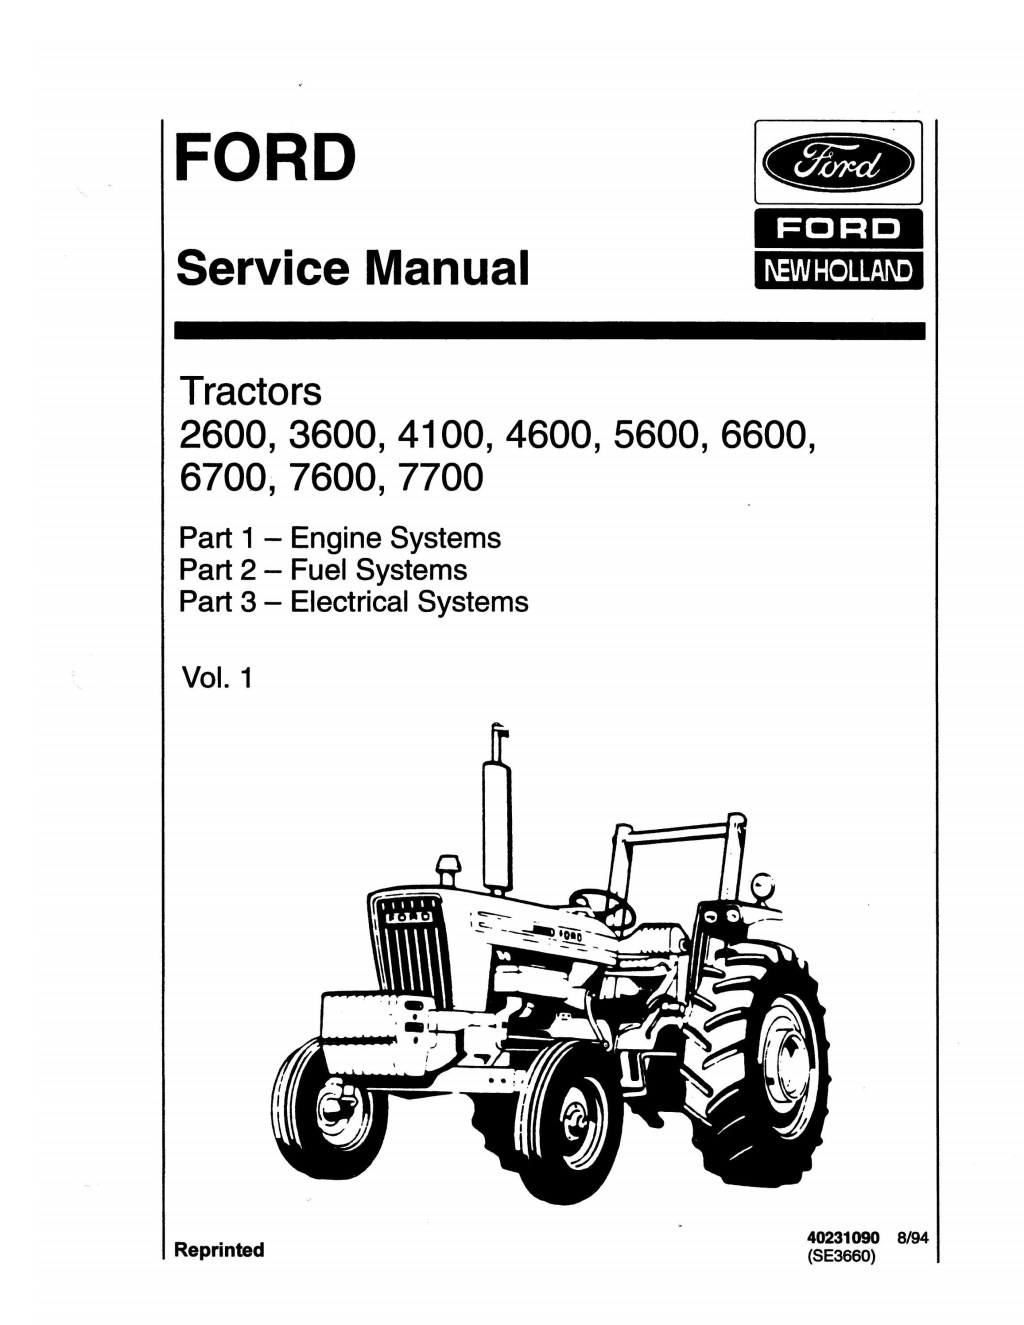 Picture of: Ford  Tractor Service Repair Manual Instant Download by